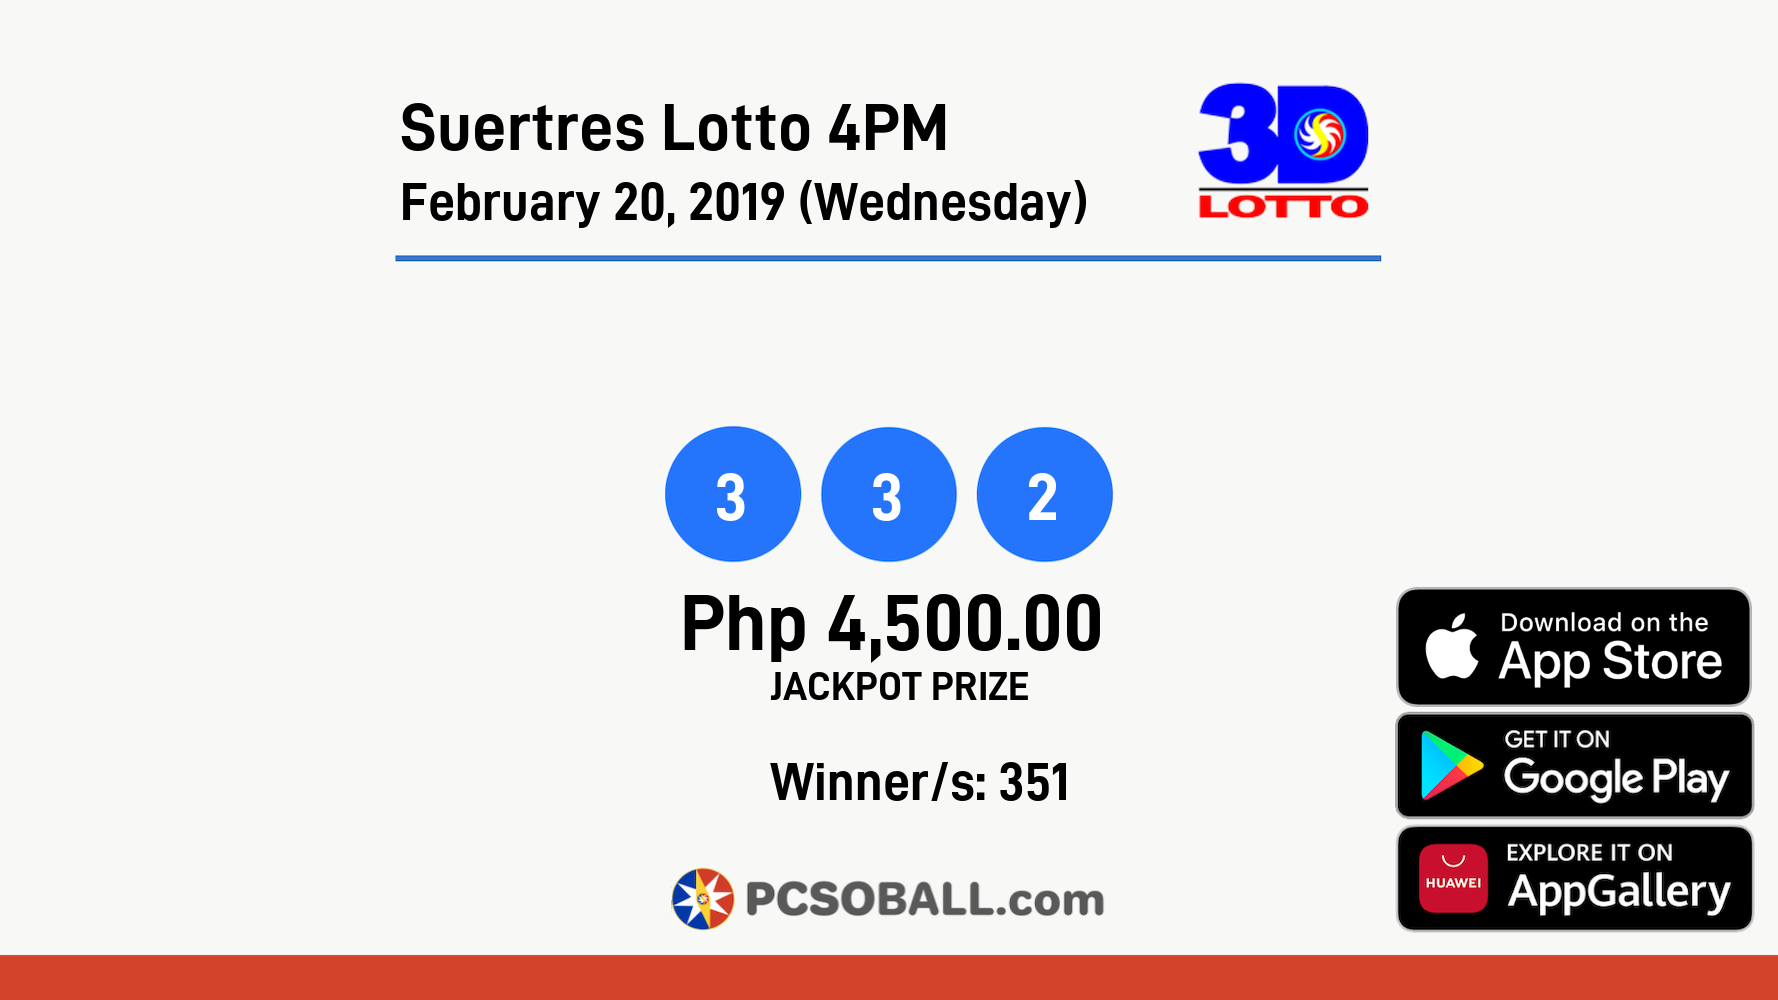 Suertres Lotto 4PM February 20, 2019 (Wednesday) Result